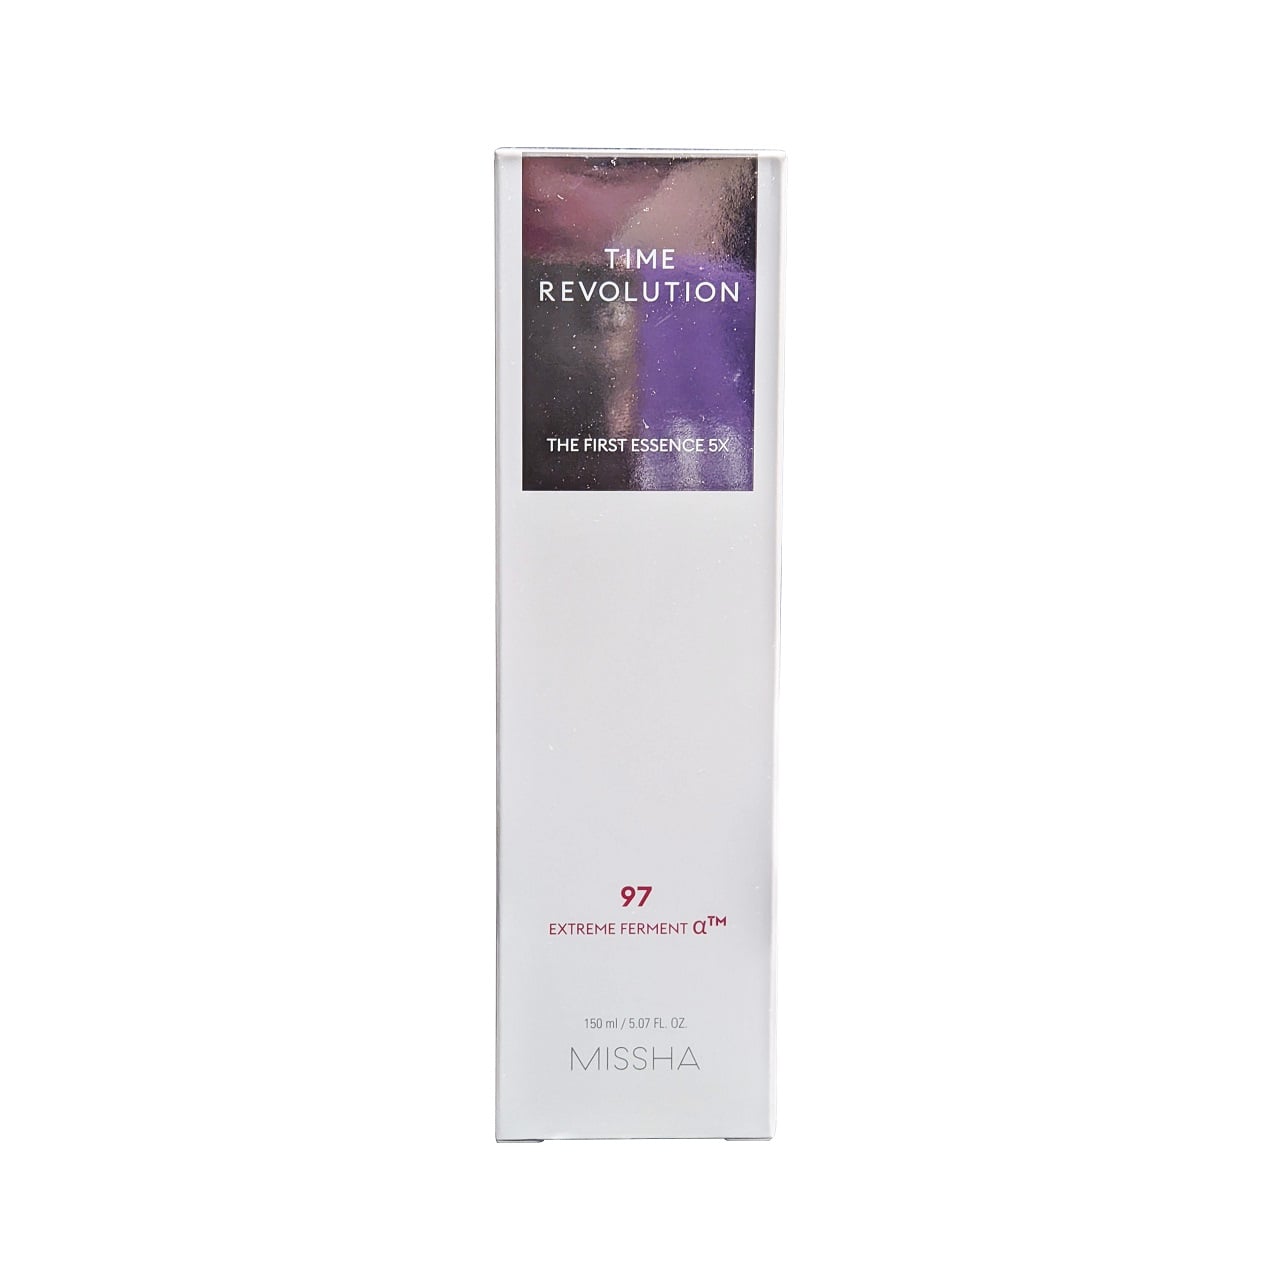 Product label for MISSHA Time Revolution The First Essence 5X (150 mL)